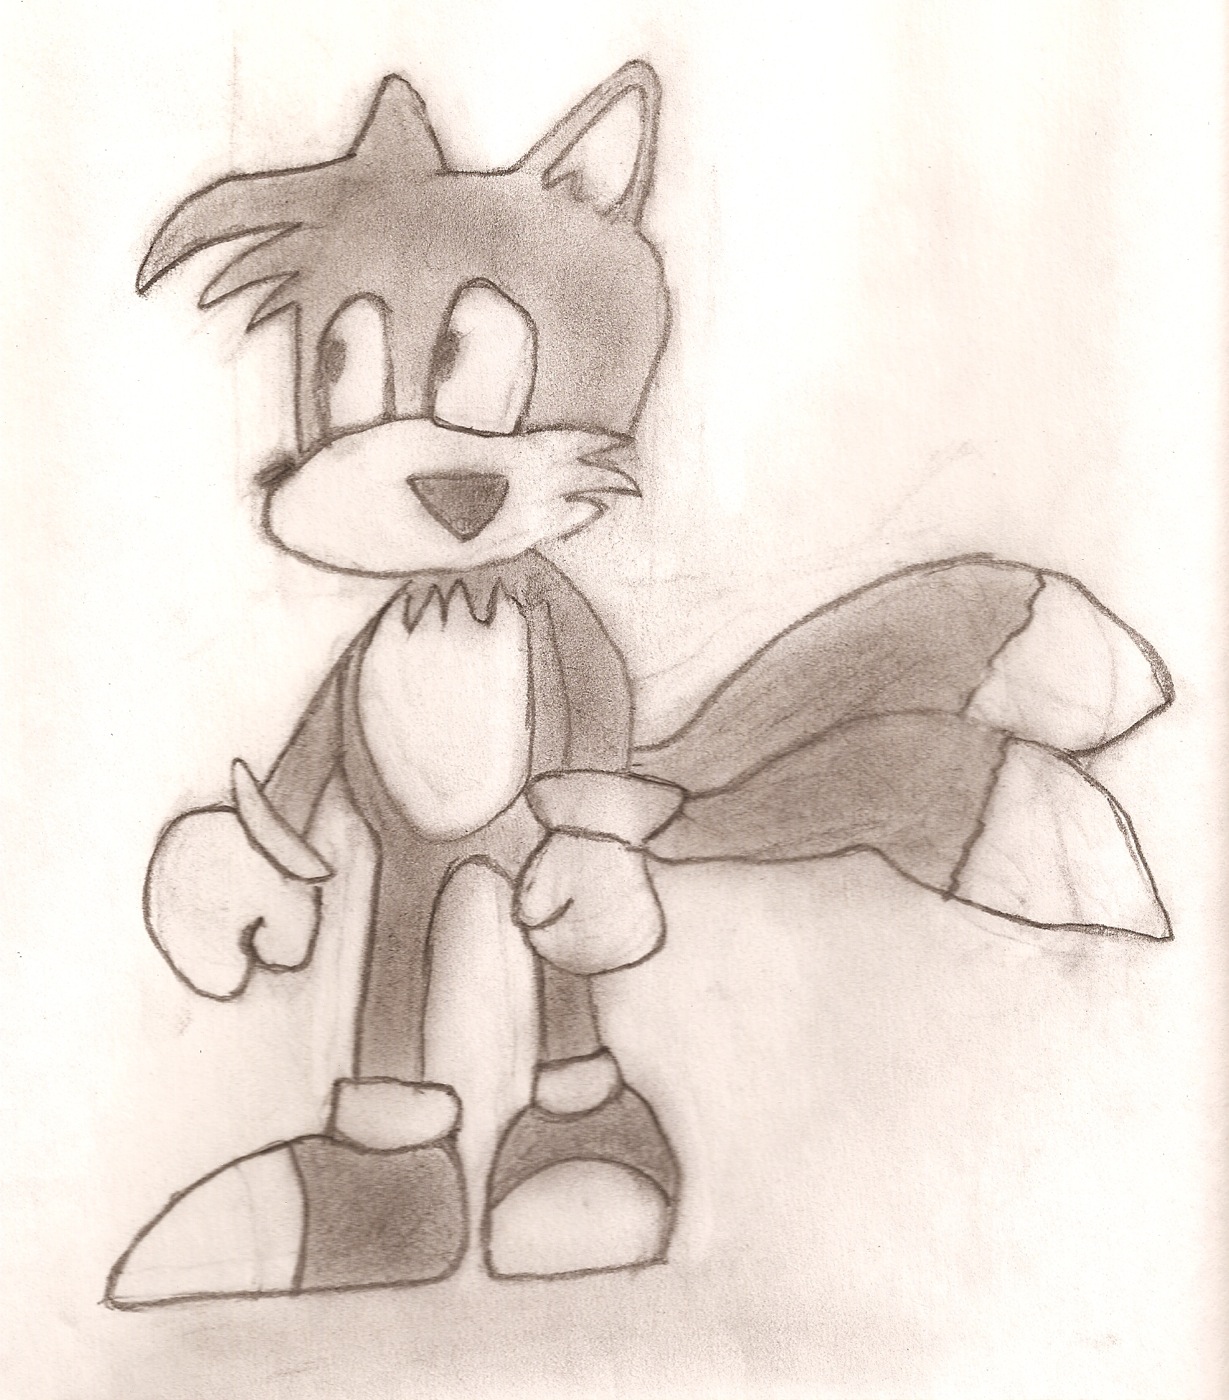 Miles "Tails" Prower by thedudewhodonttalk18